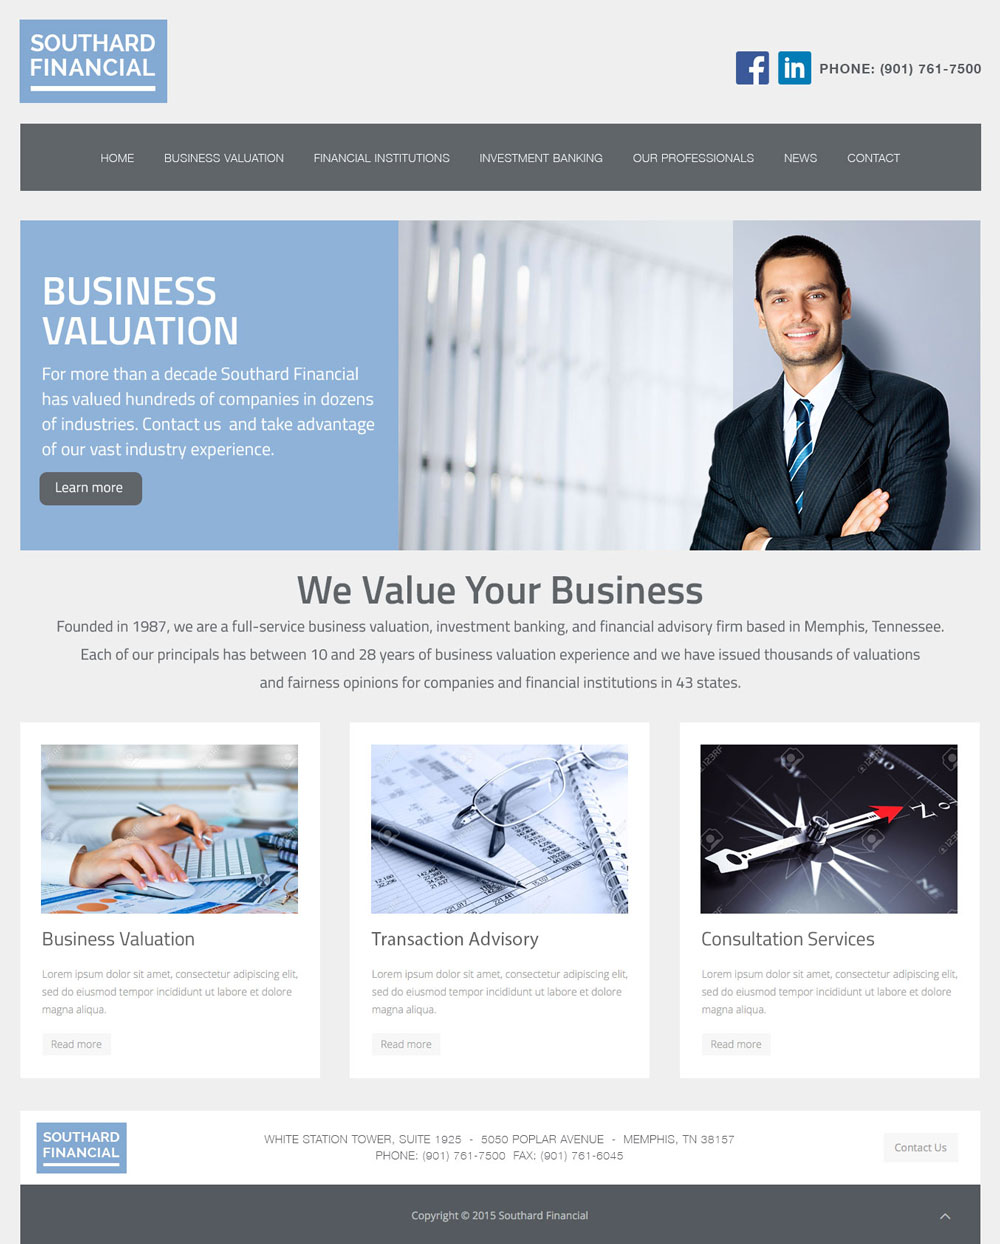 image of a website design concept for southard financial